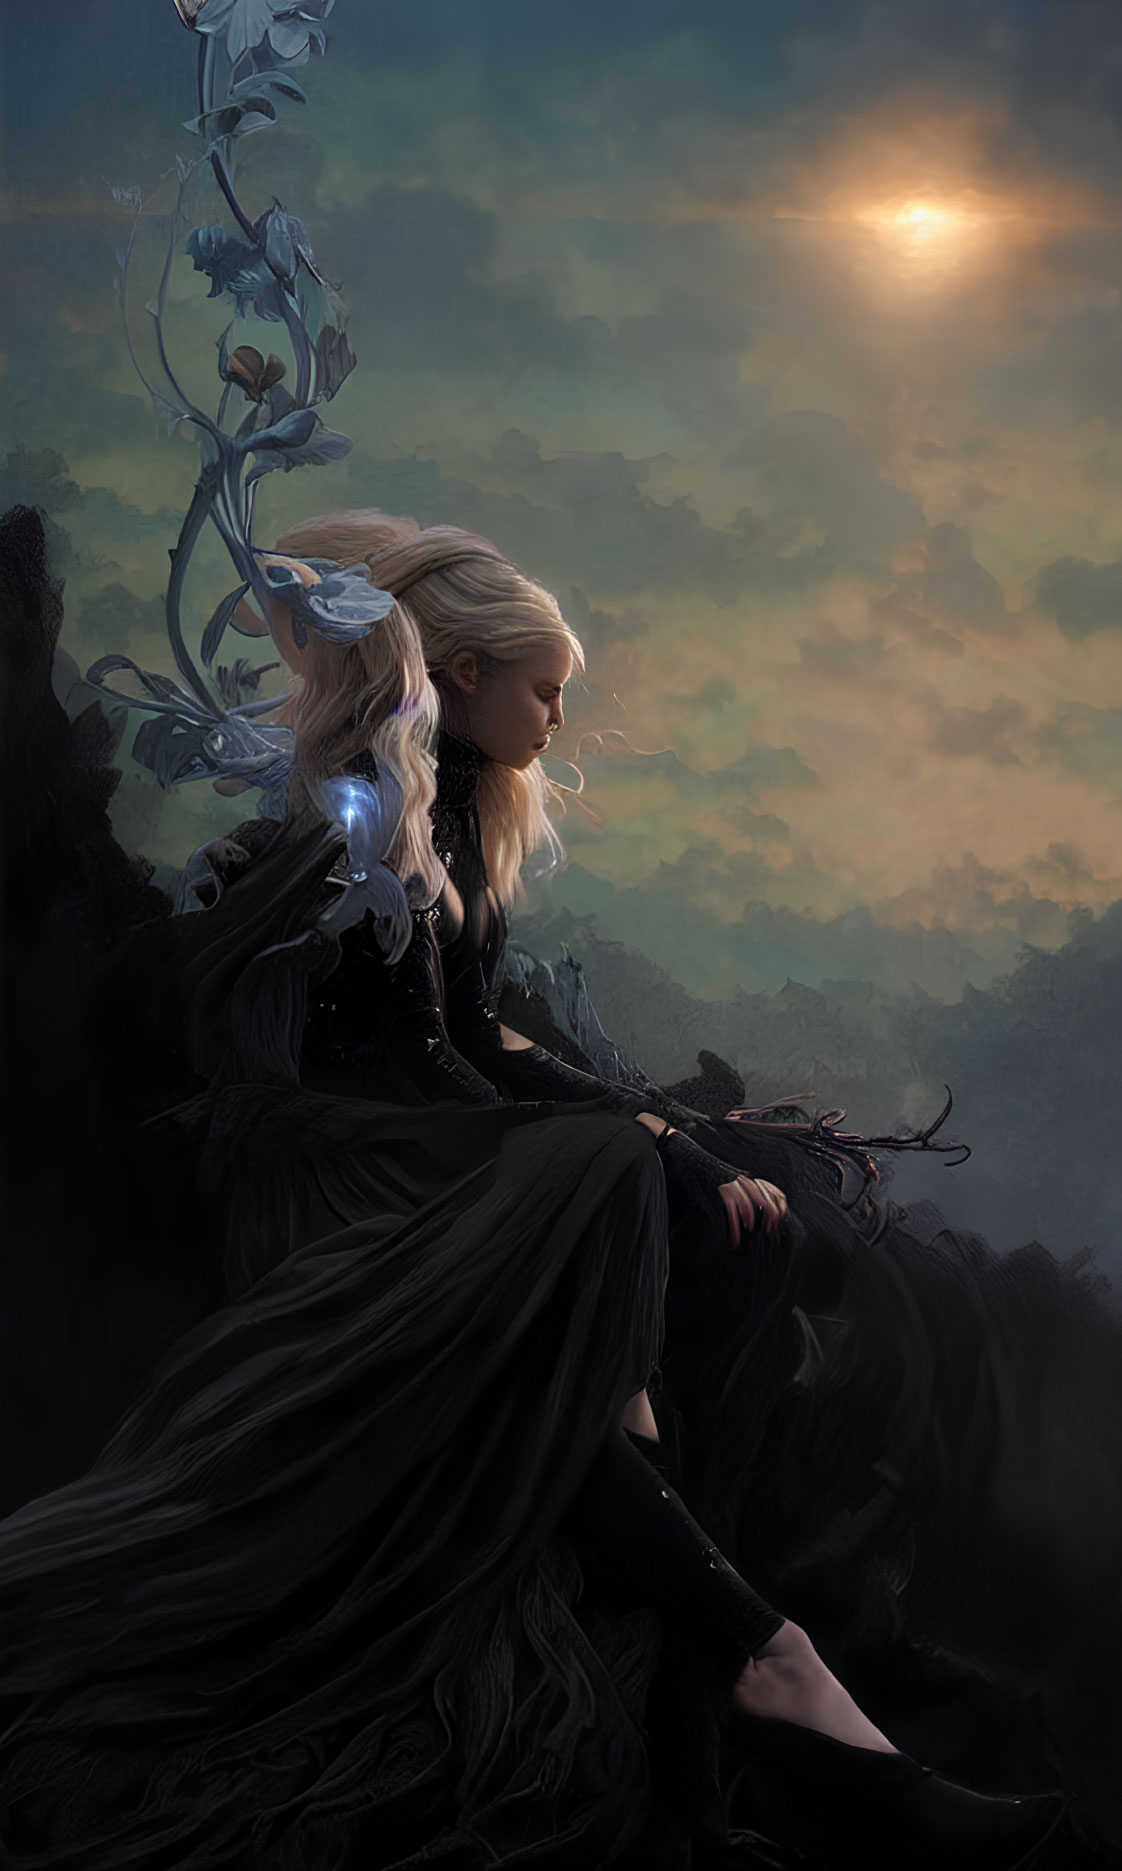 Blond-haired elf on gnarled branch in mystical forest at sunset